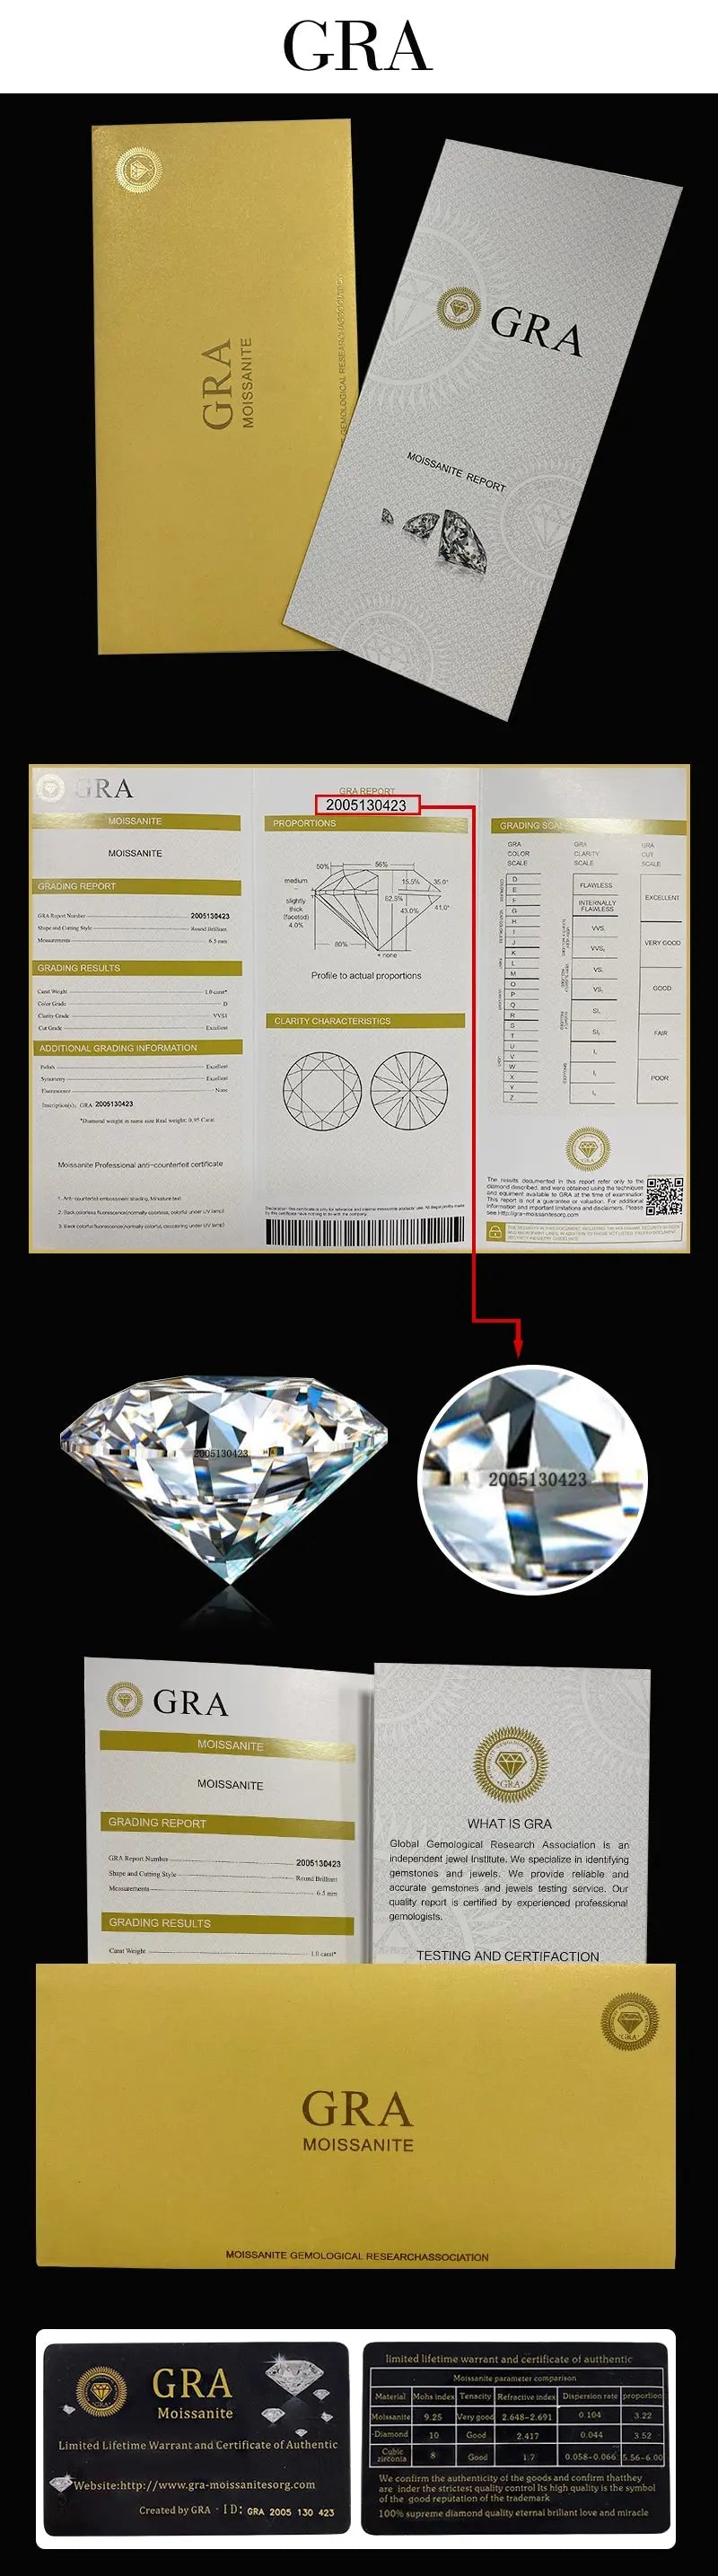 Round Cut Moissanite Loose Stones 5mm (0.5ct) - 12mm (6ct) options - DE Moissanite Engagement Rings & Jewelry | Luxus Moissanite